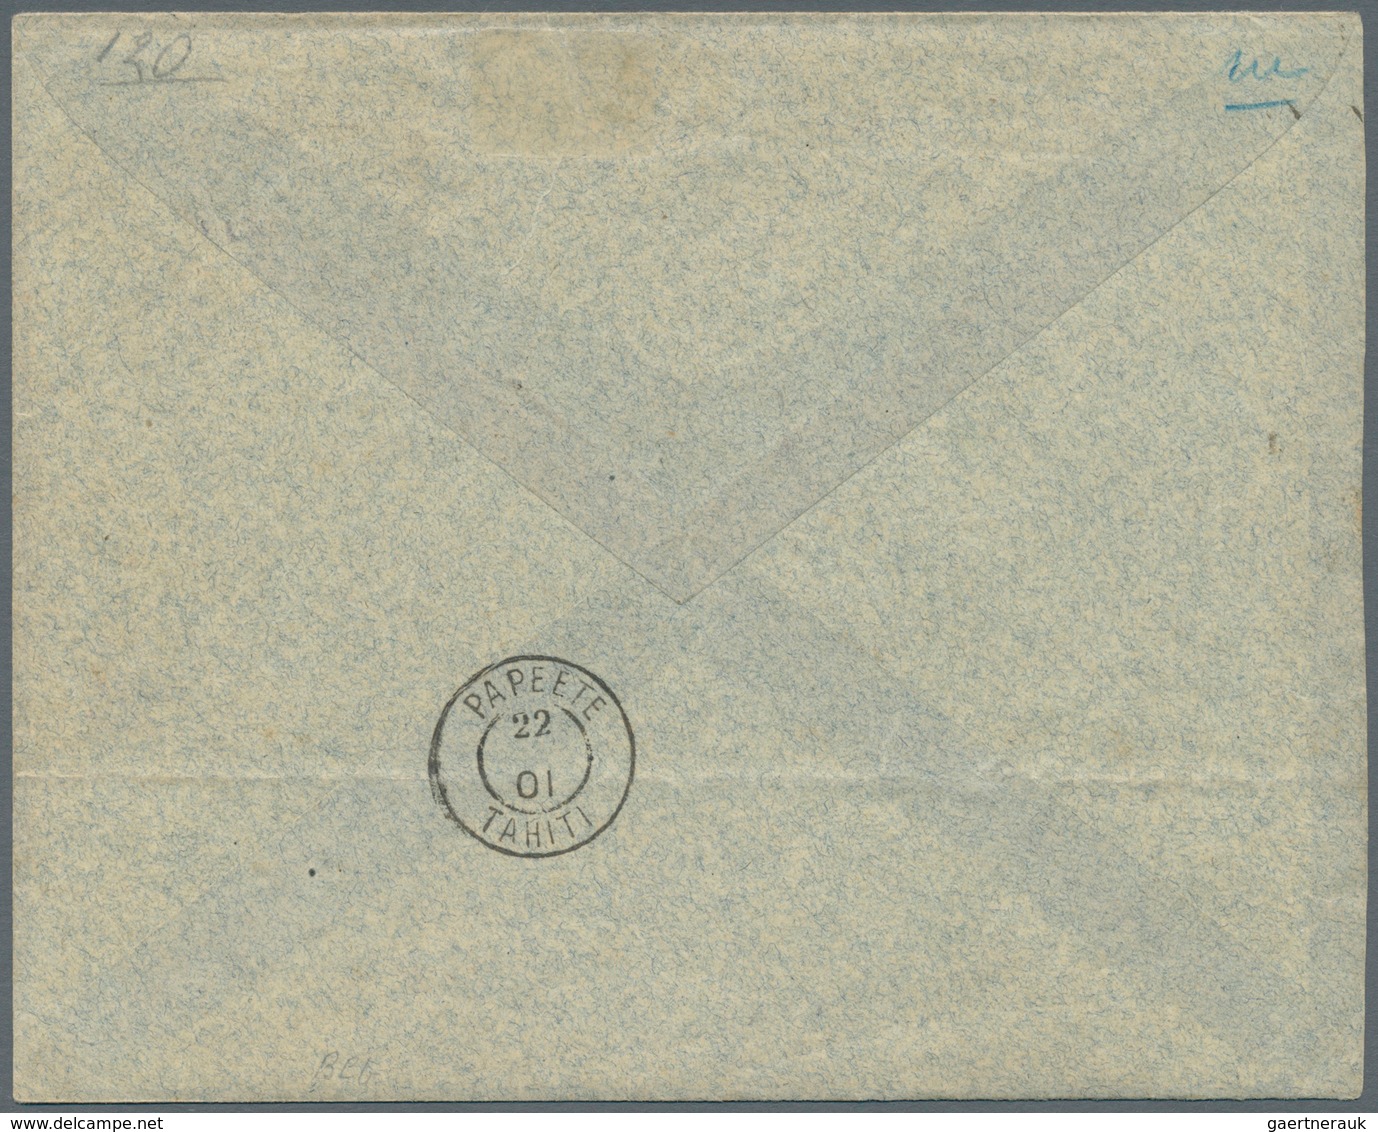 Cook-Inseln: 1901, Angel Tern 1 Sh. Carmin Tied By Cds. "COOK ISLAND...SE.01" To Registered Cover Ad - Cookeilanden